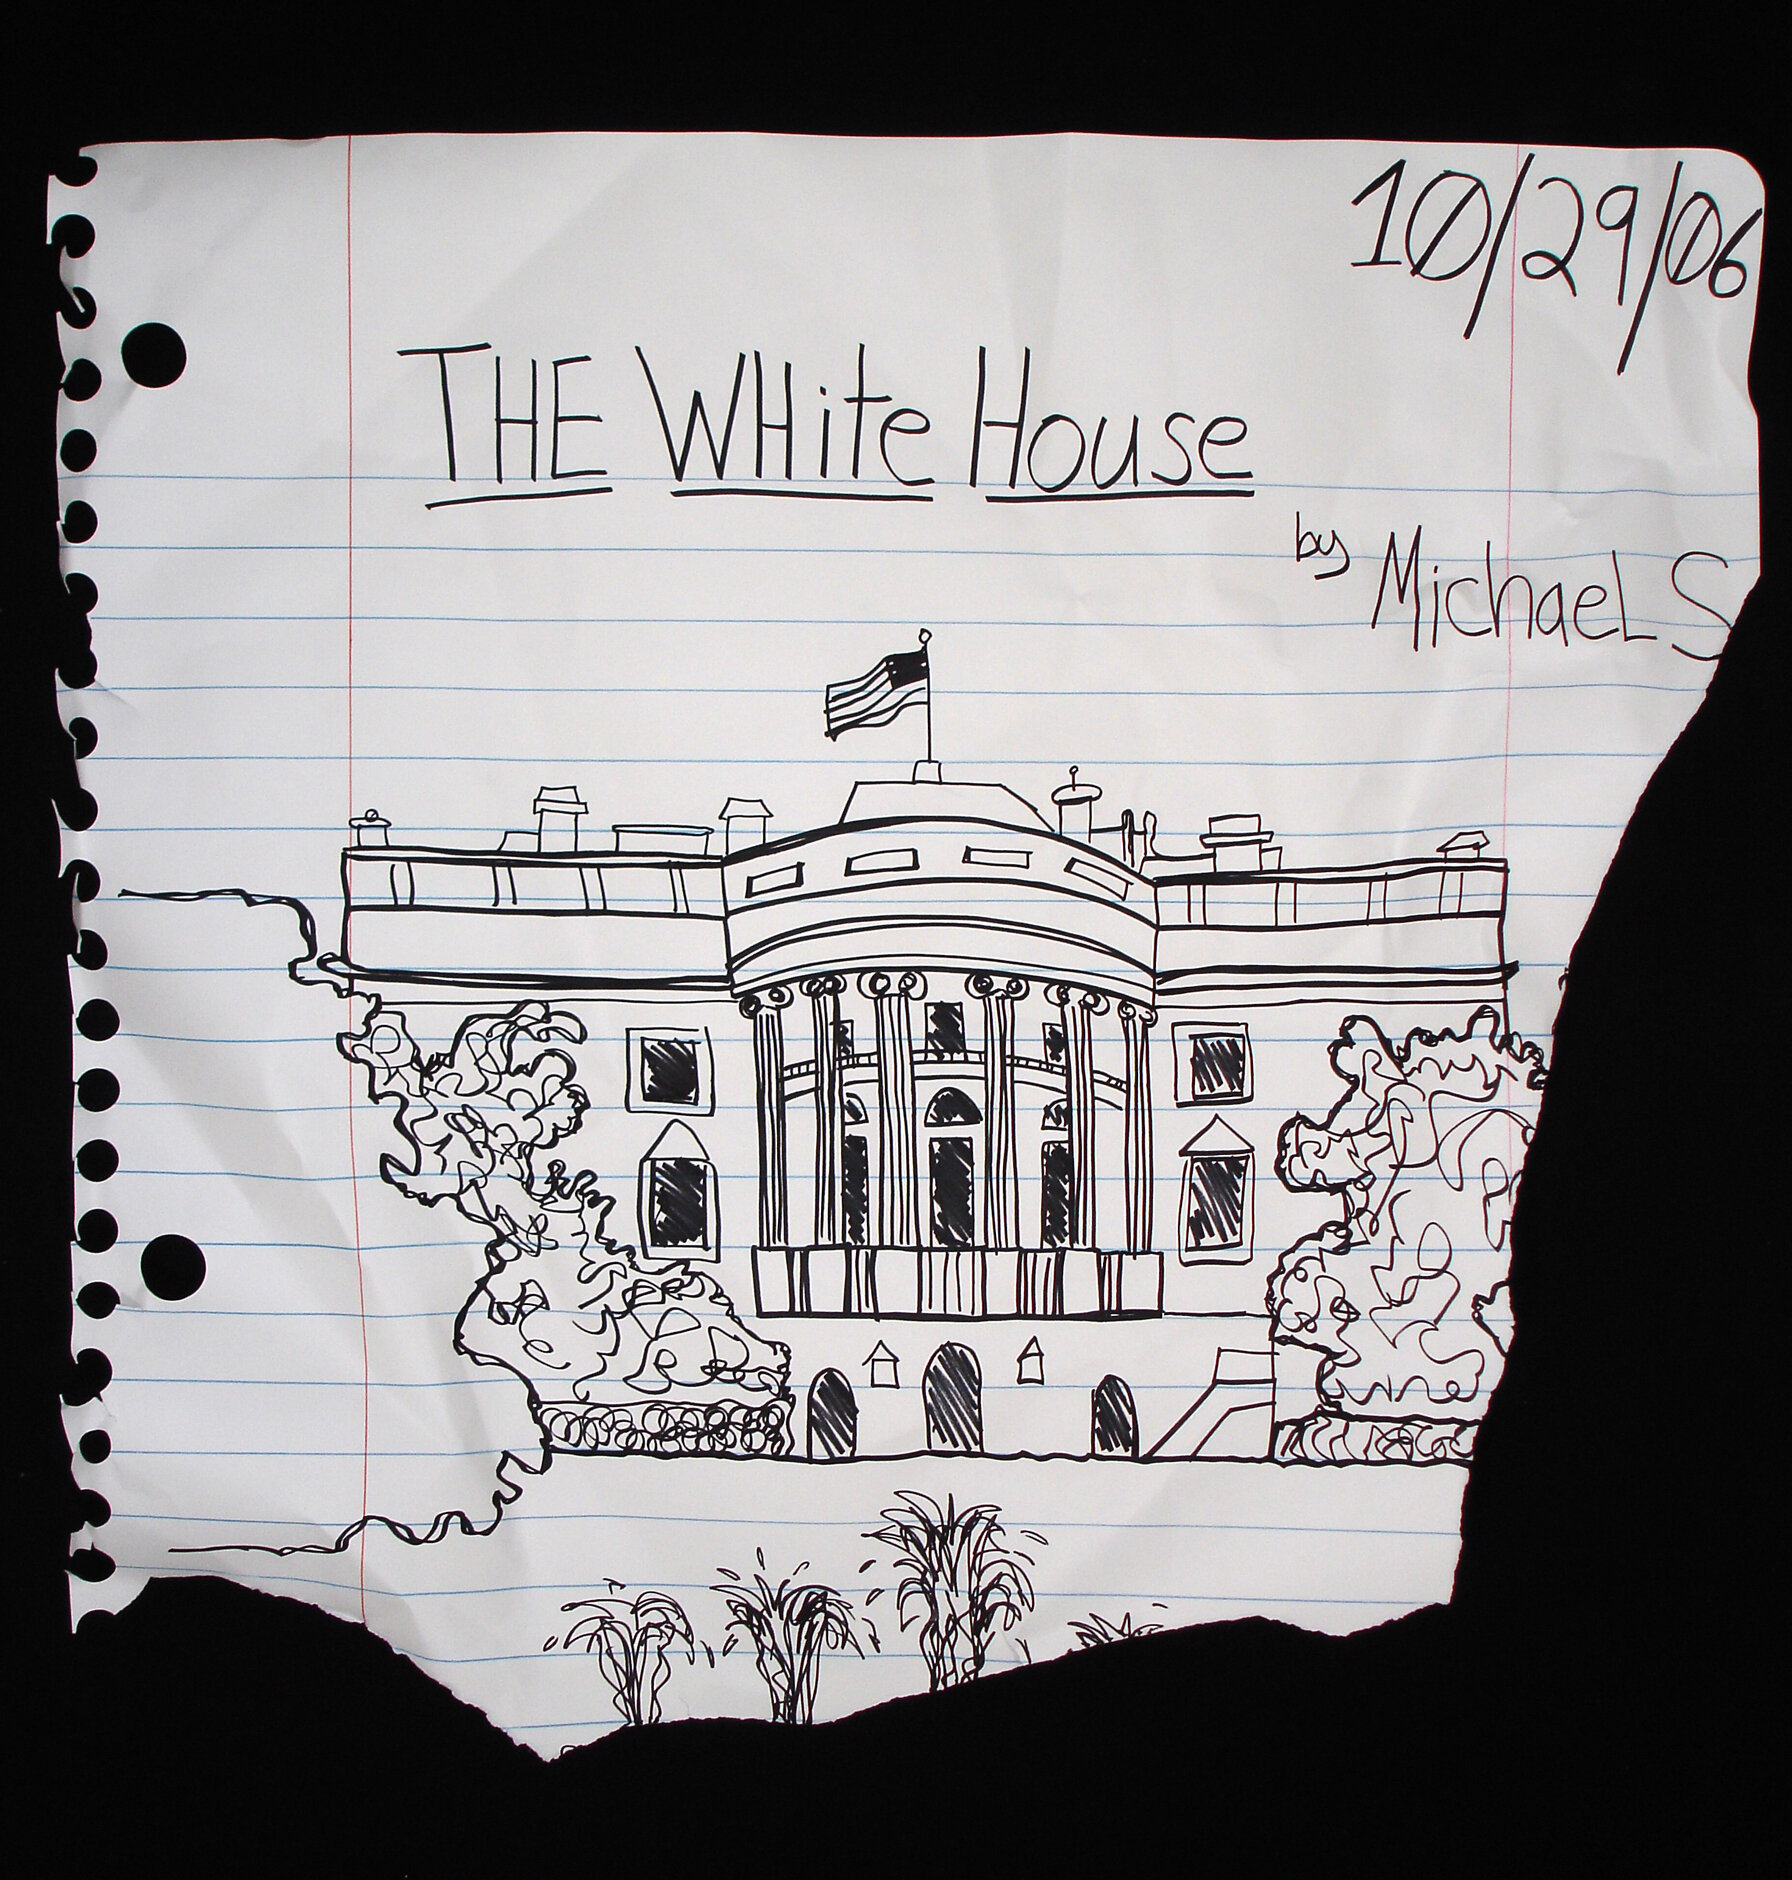  Michael Scoggins,  The White House III, 2006 .  Marker, colored pencil on paper 48 x 51 in.   18,000.00 usd  